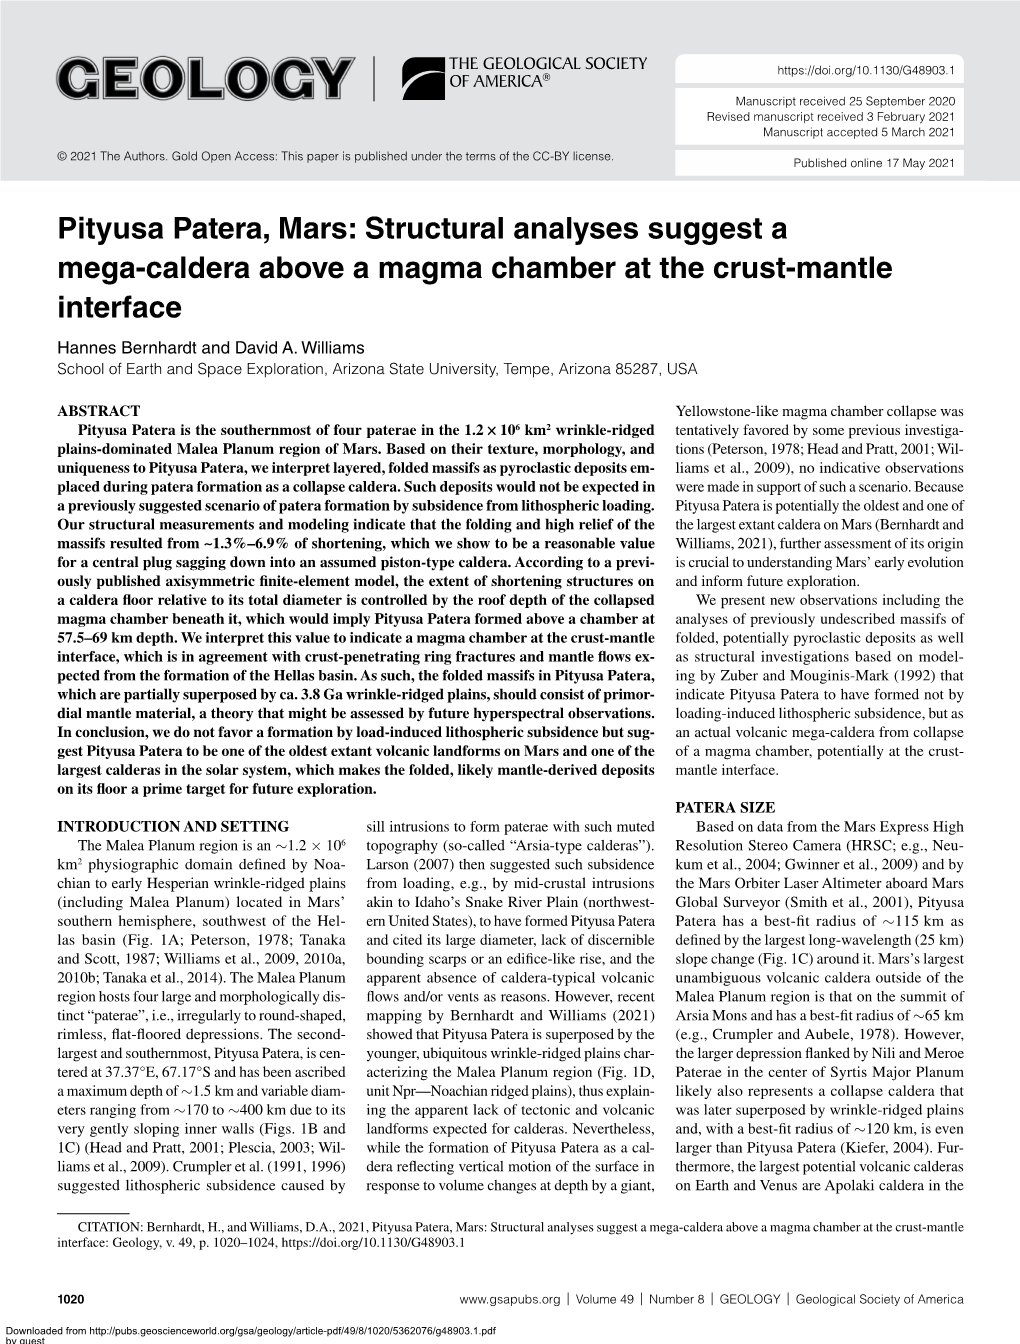 Pityusa Patera, Mars: Structural Analyses Suggest a Mega-Caldera Above a Magma Chamber at the Crust-Mantle Interface Hannes Bernhardt and David A